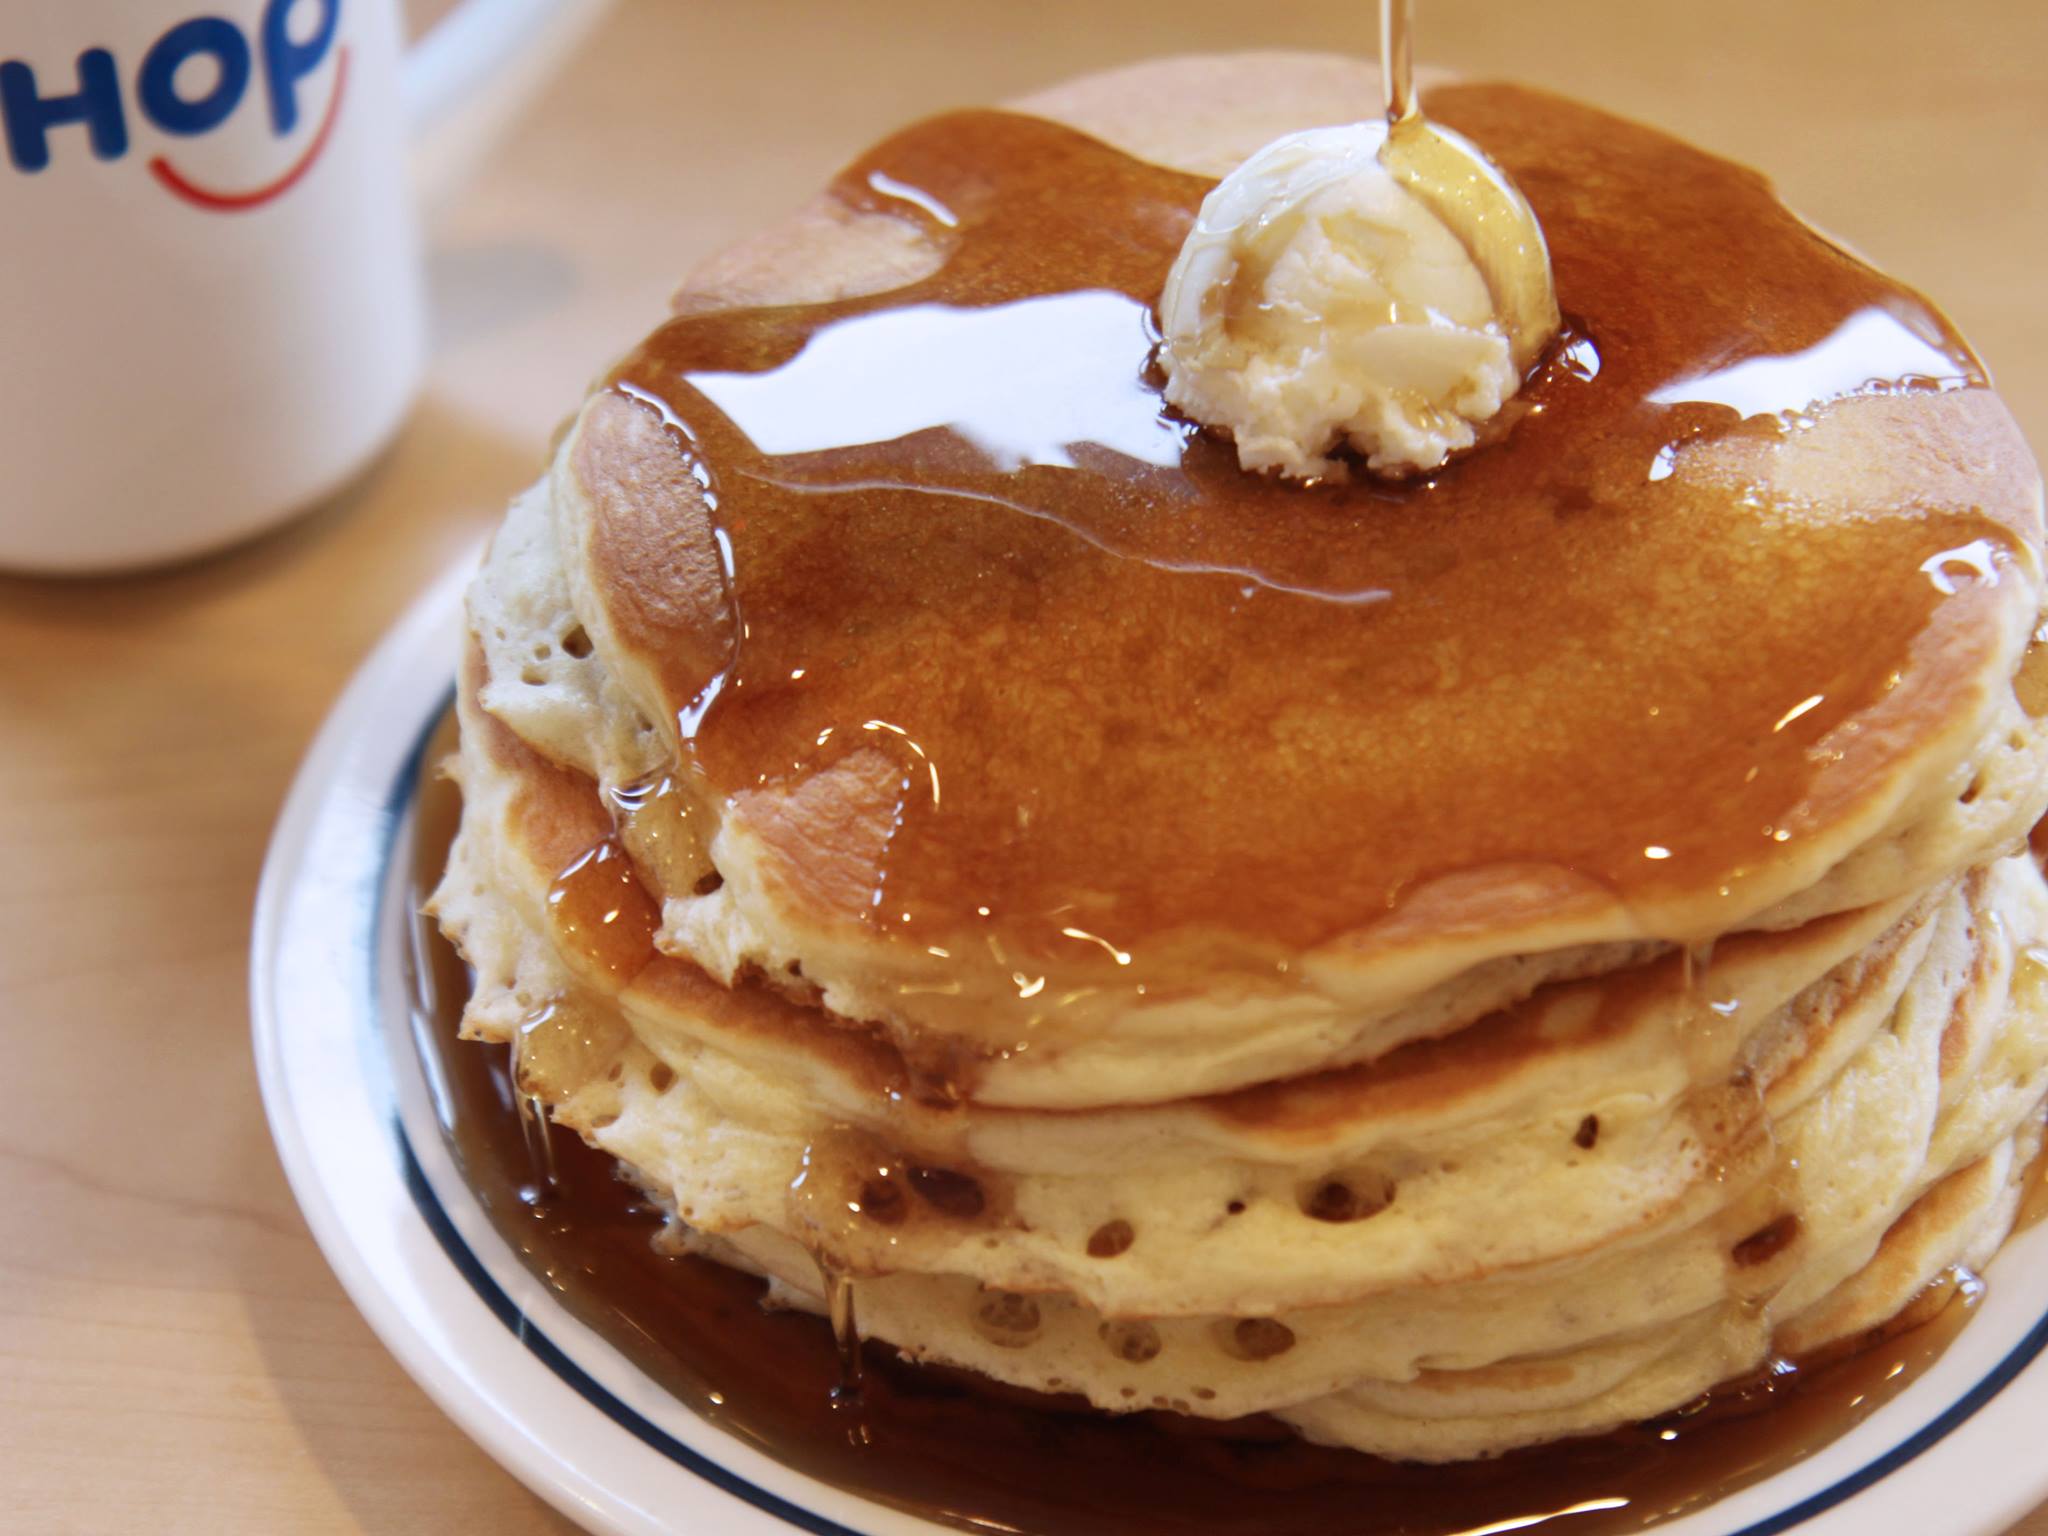 IHOP's New Breakfast Tacos Are Wrapped in Pancakes